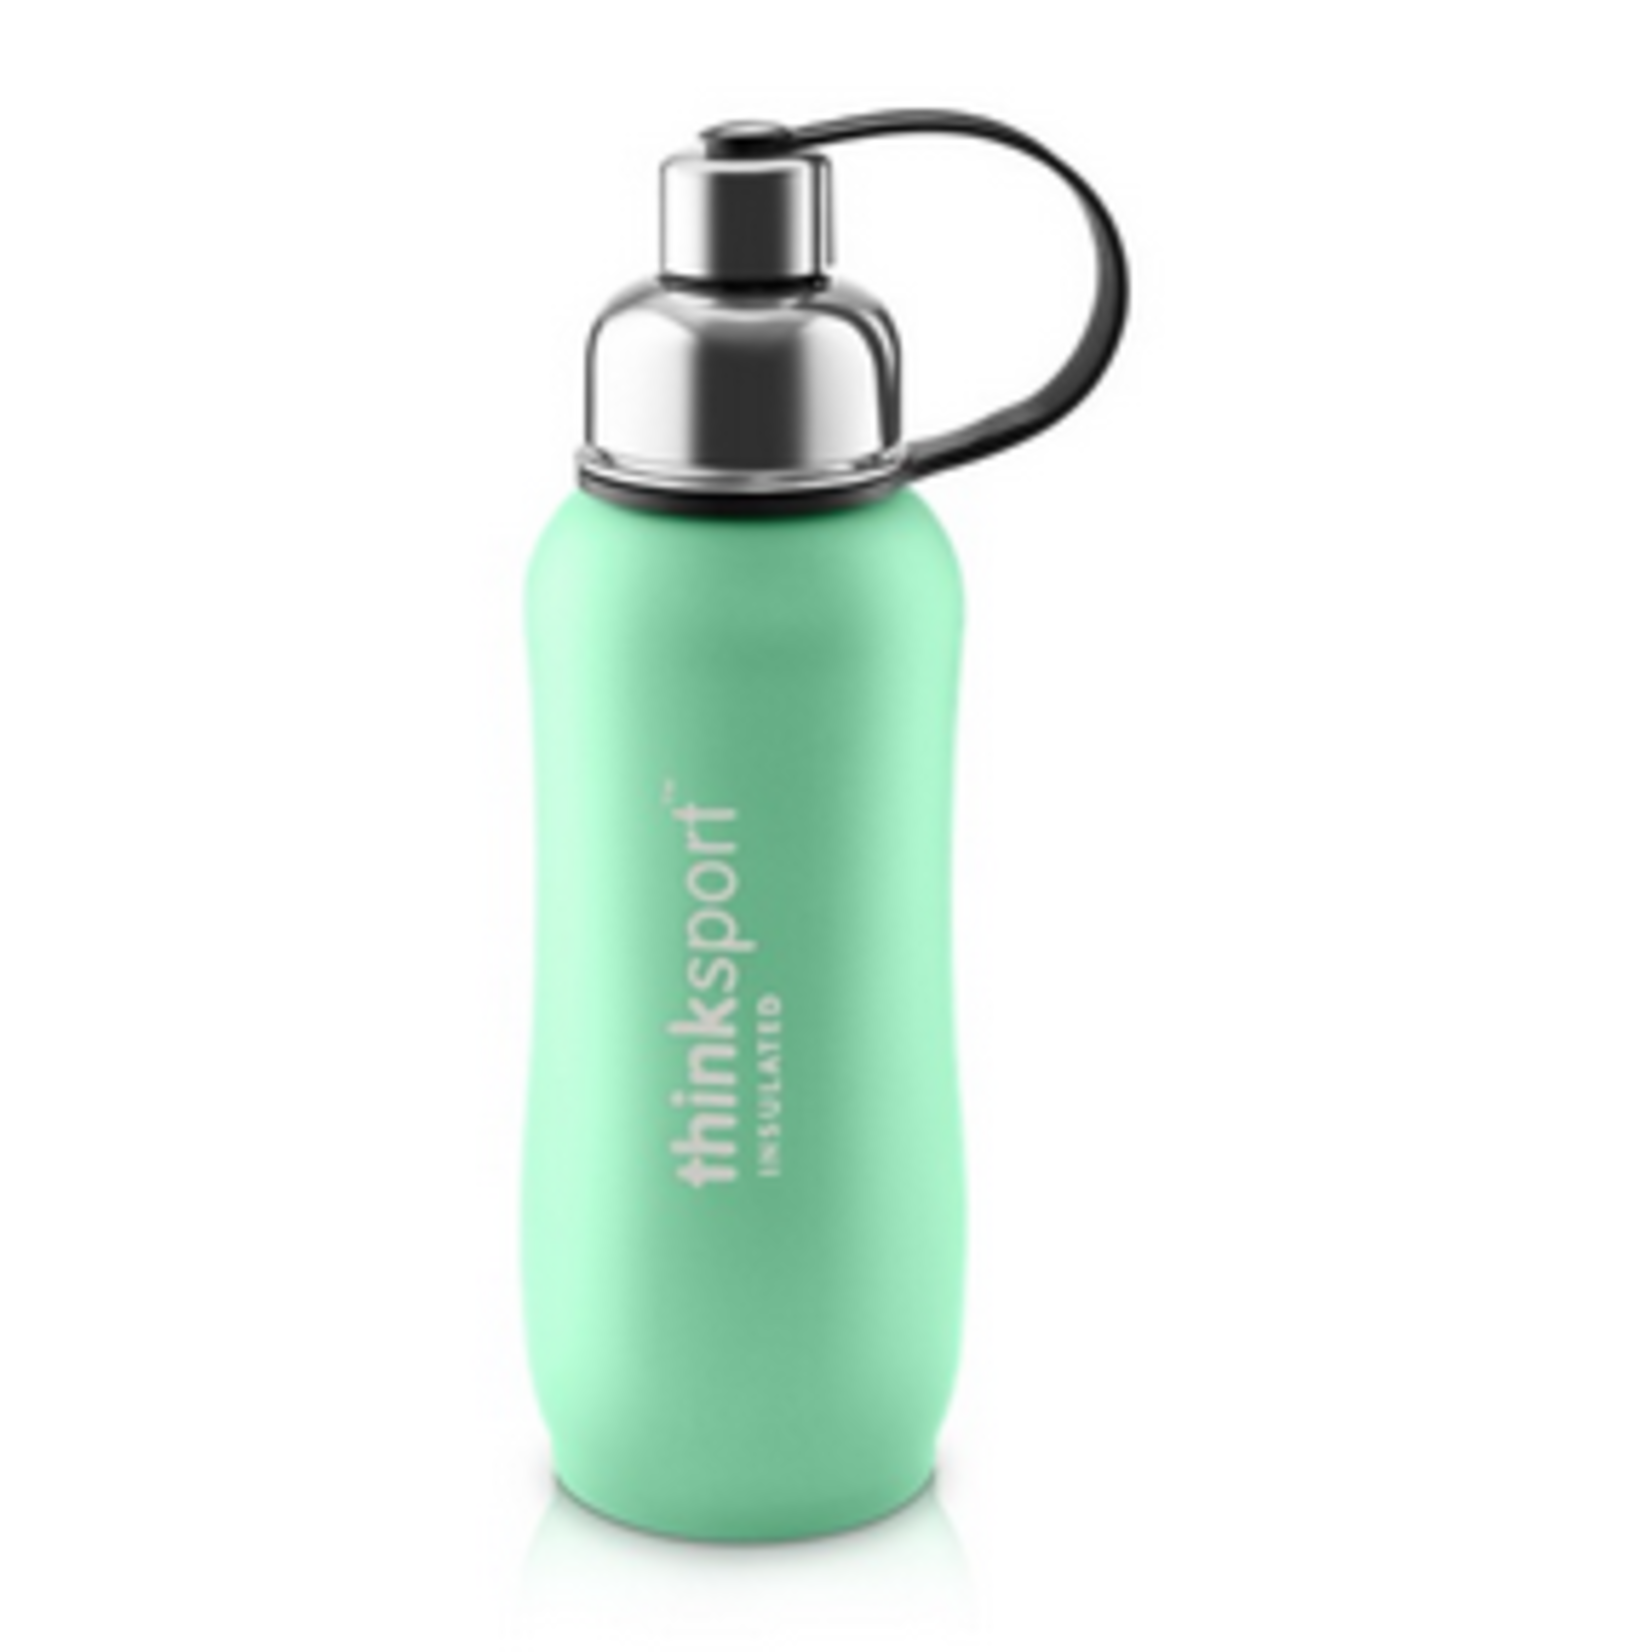 THINK SPORT THINK SPORT INSULATED SPORTS BOTTLE MINT GREEN 750ML